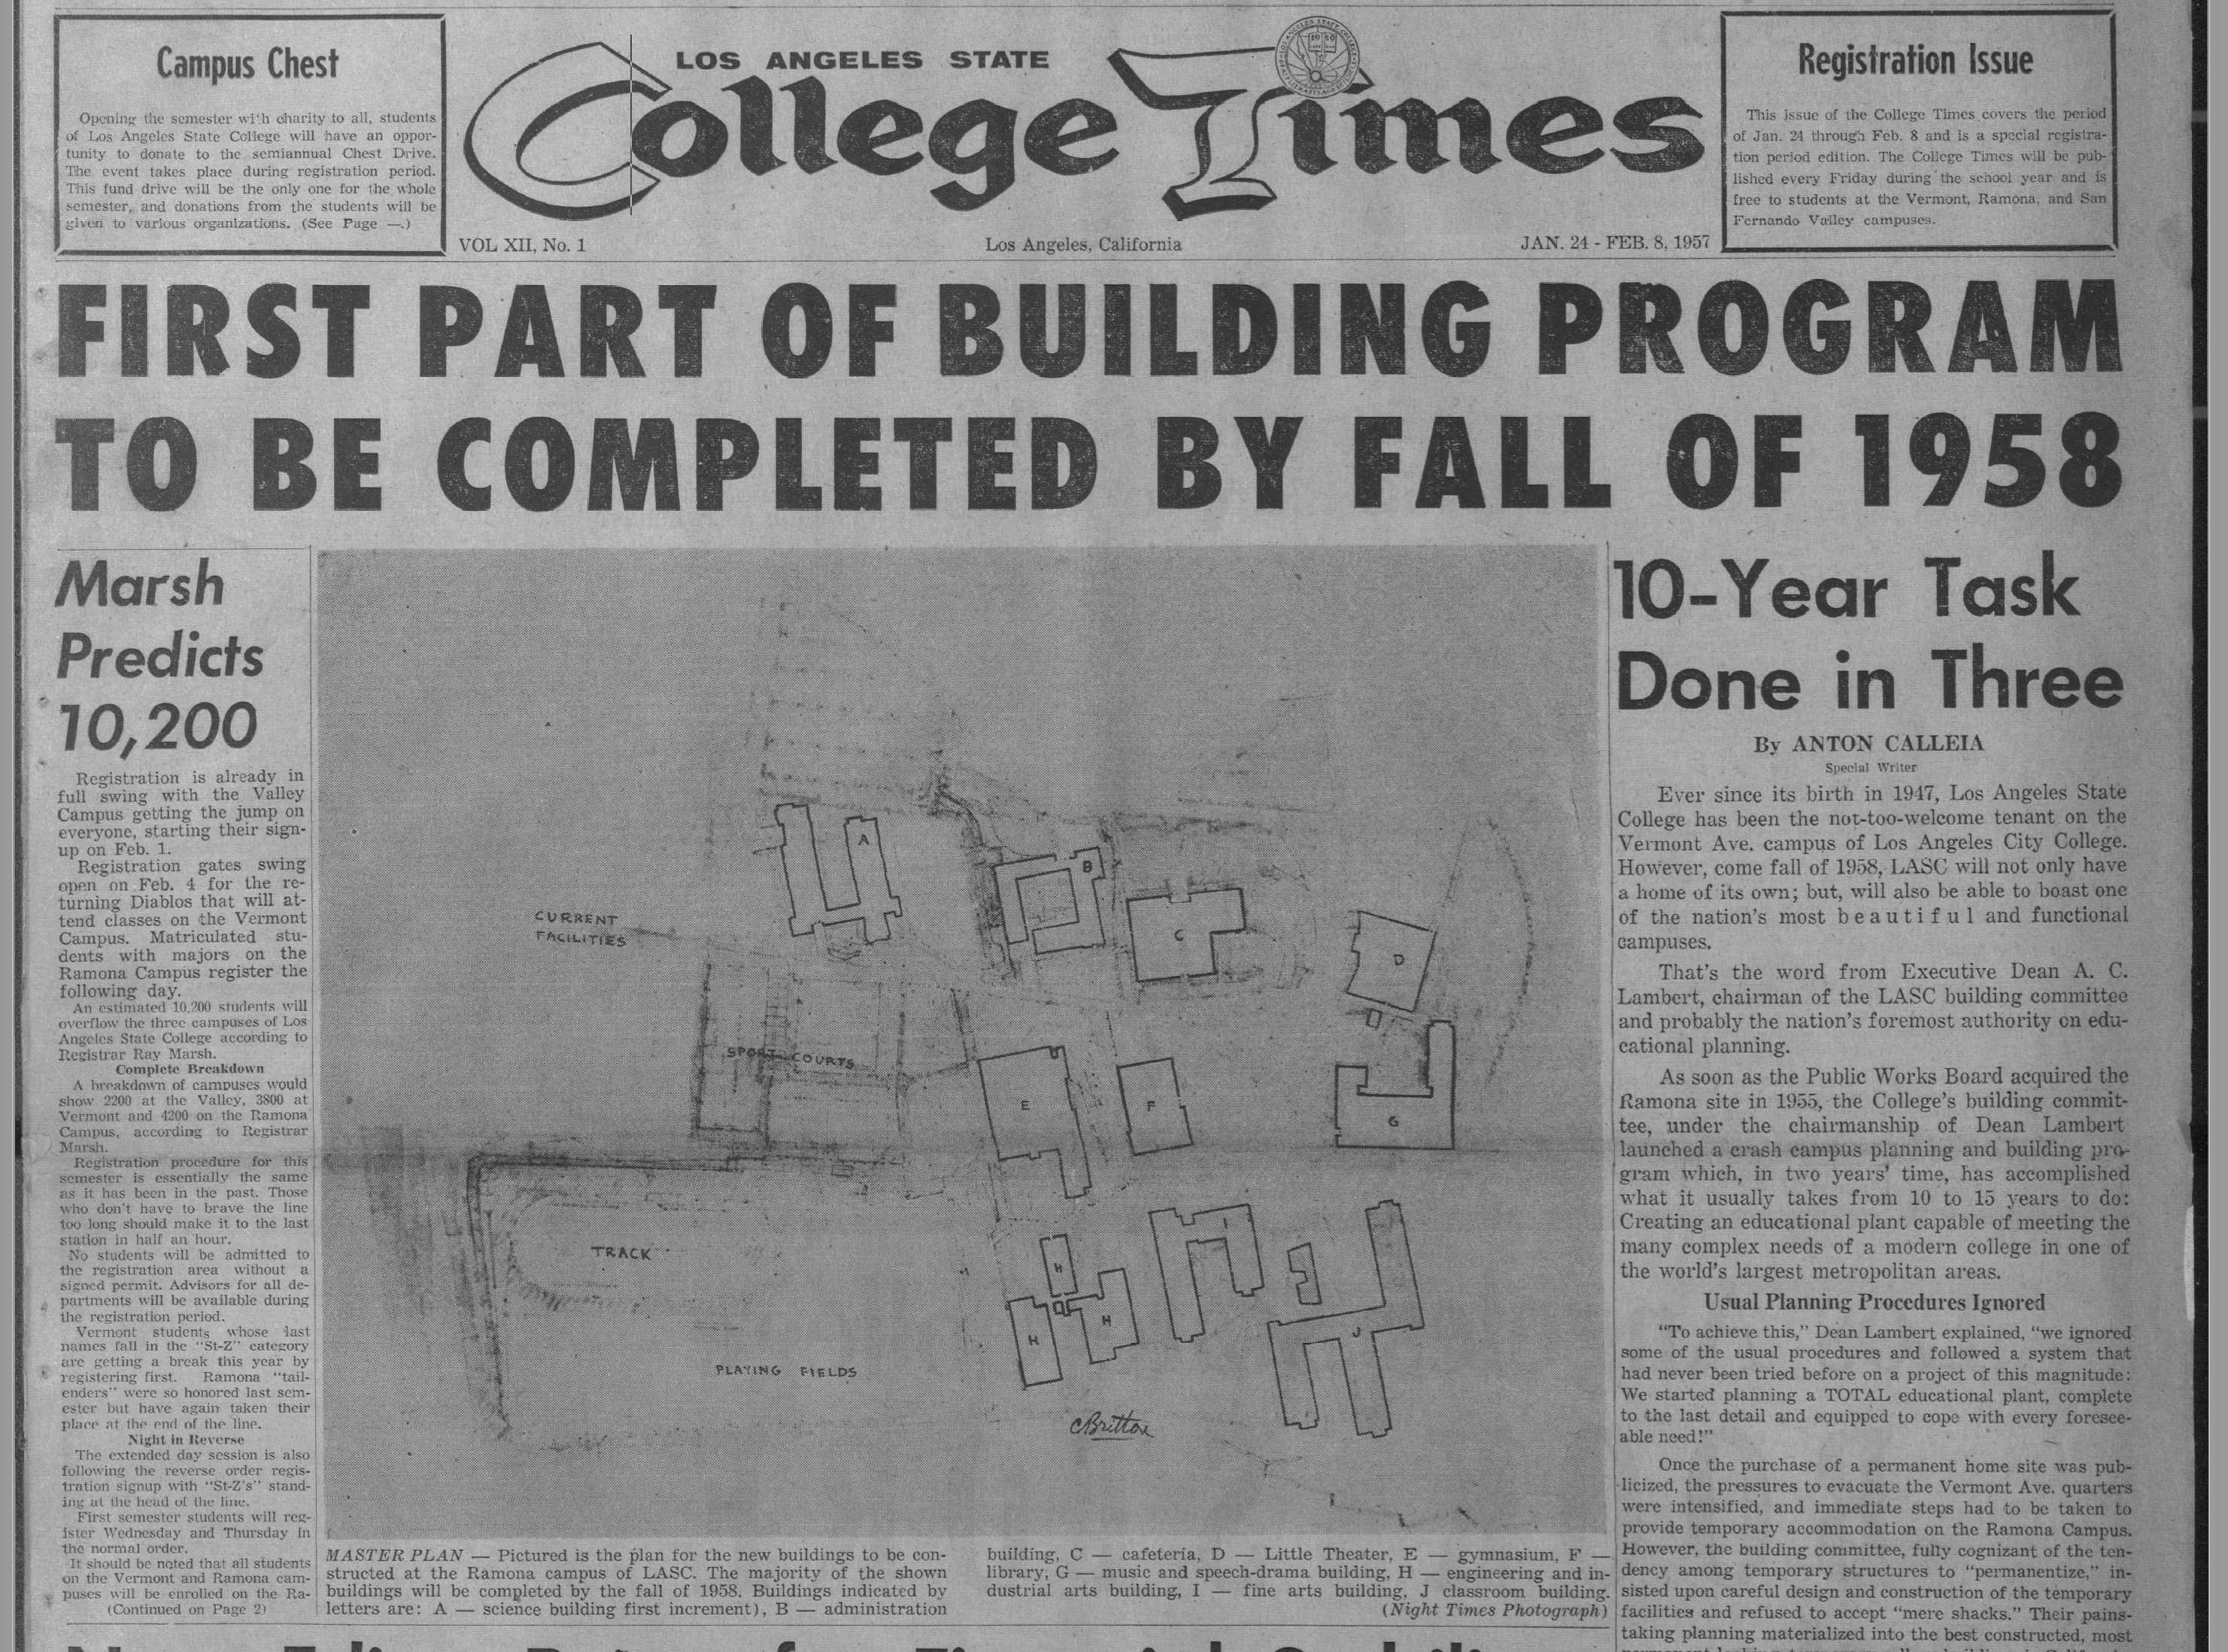 The front page of a College Times newspaper with the headline "First part of buidling program to be completed by Fall of 1958."